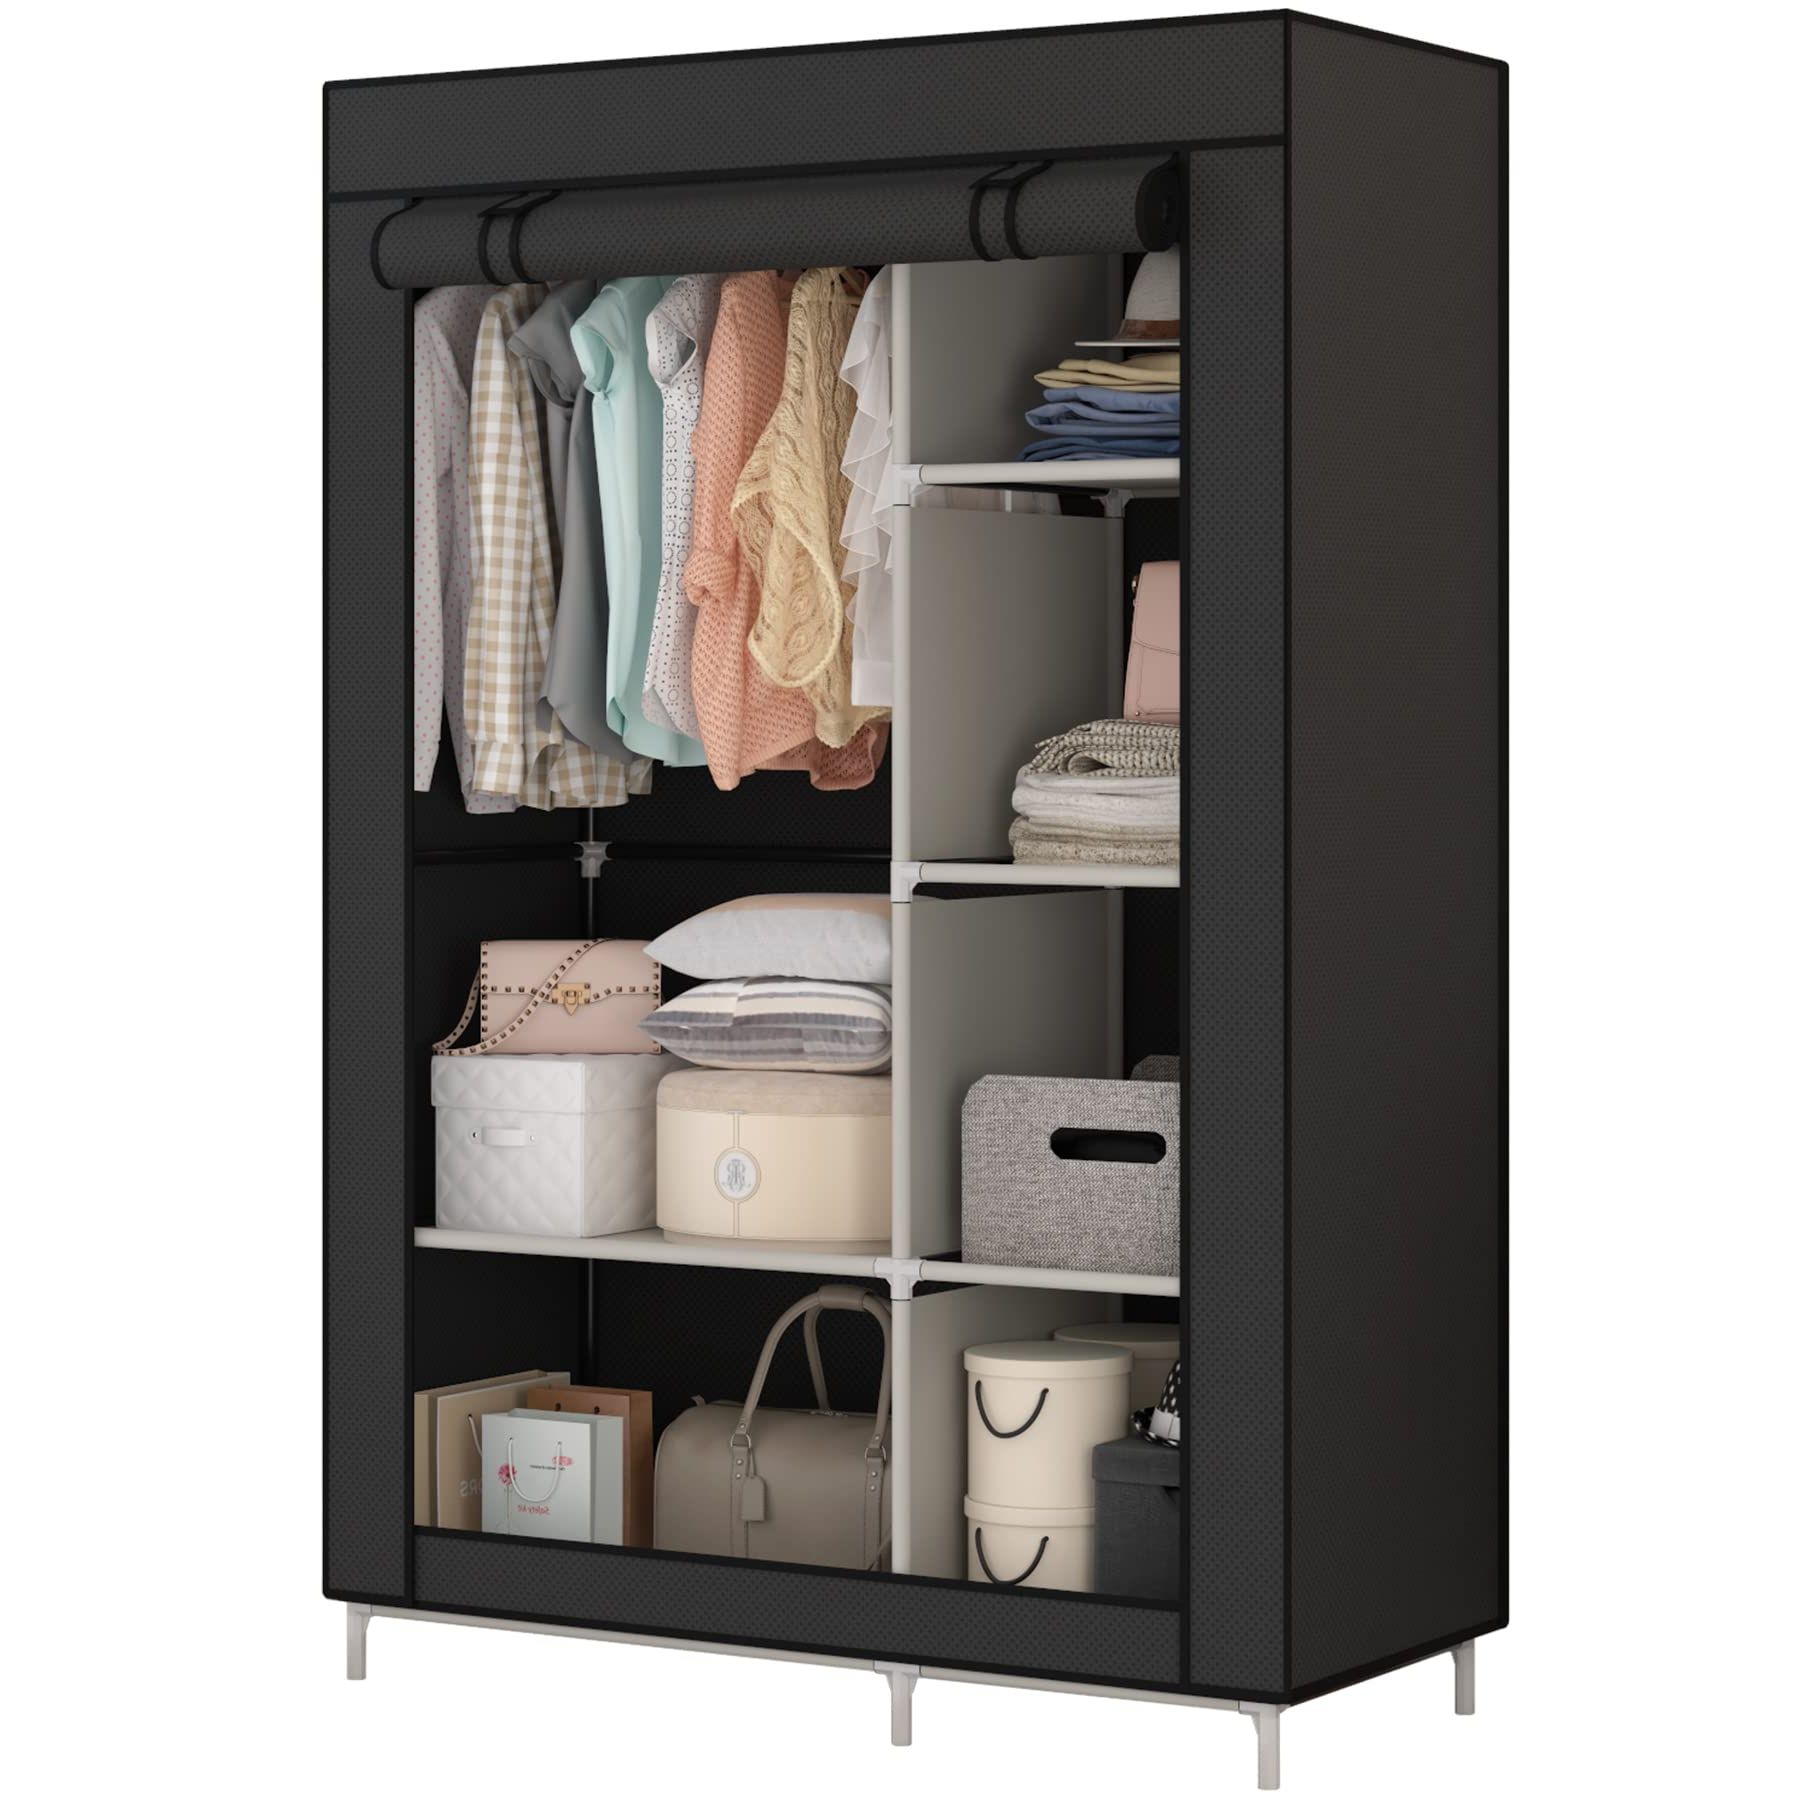 Latest Amazon: Calmootey Closet Storage Organizer,portable Wardrobe With 6  Shelves And Clothes Rod,non Woven Fabric Cover With 4 Side Pockets,black :  Home & Kitchen In 6 Shelf Non Woven Wardrobes (View 2 of 10)